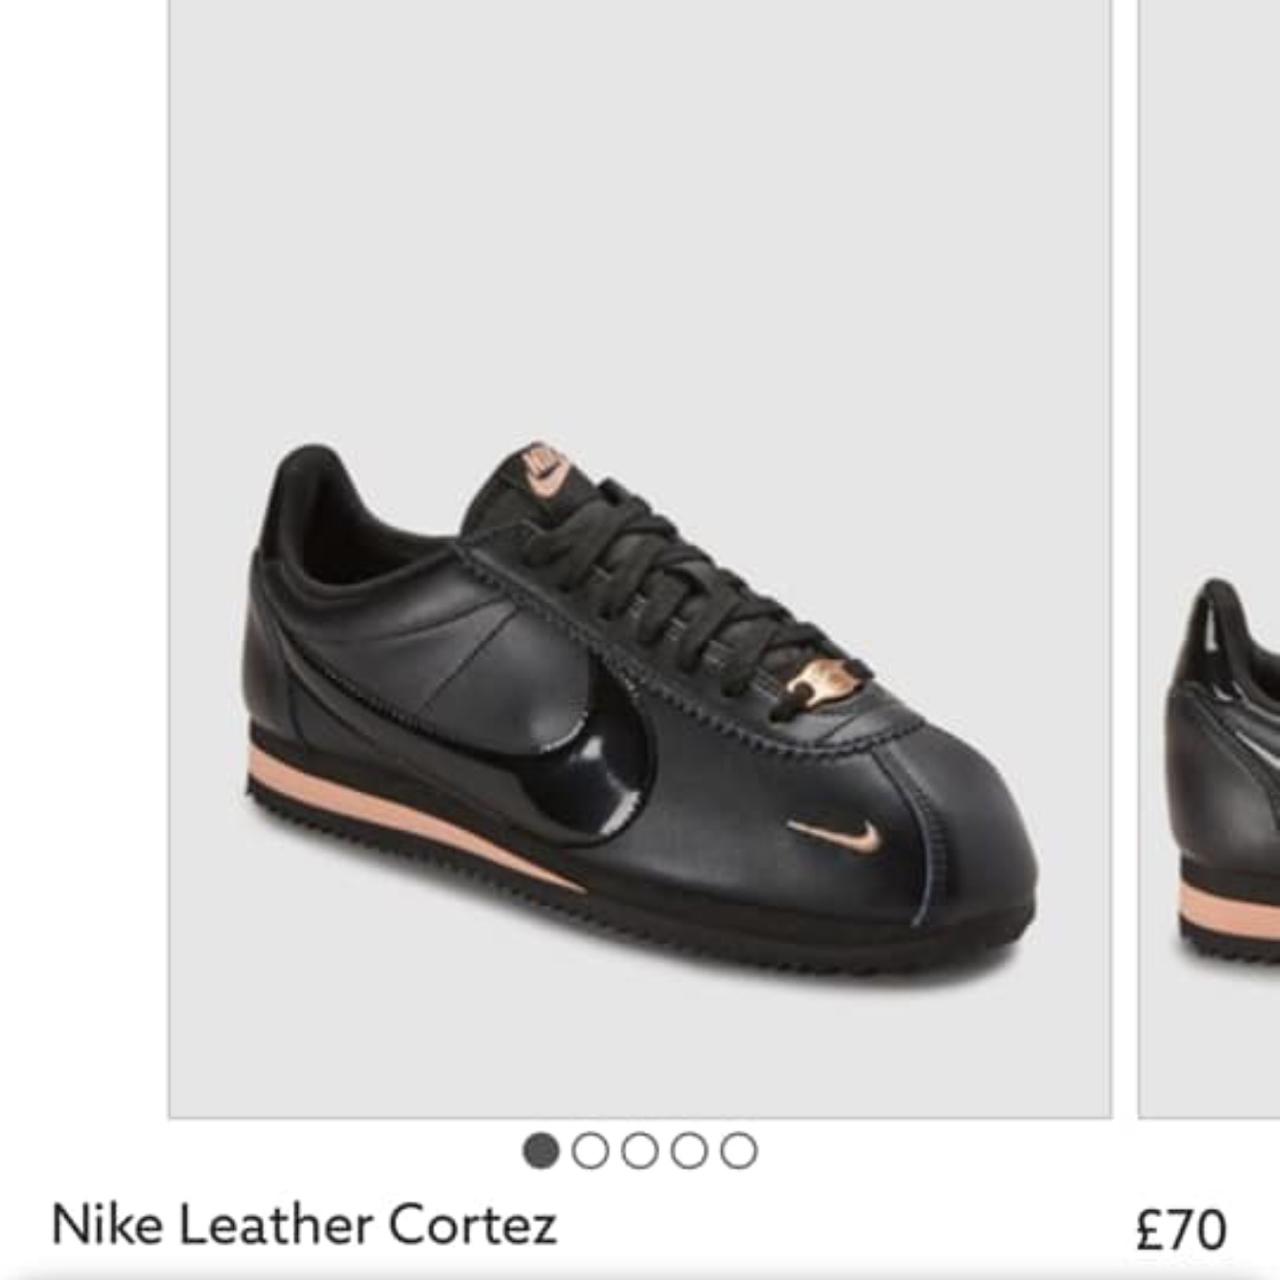 Brand new. Nike cortez. Black and rose gold. Size 3.